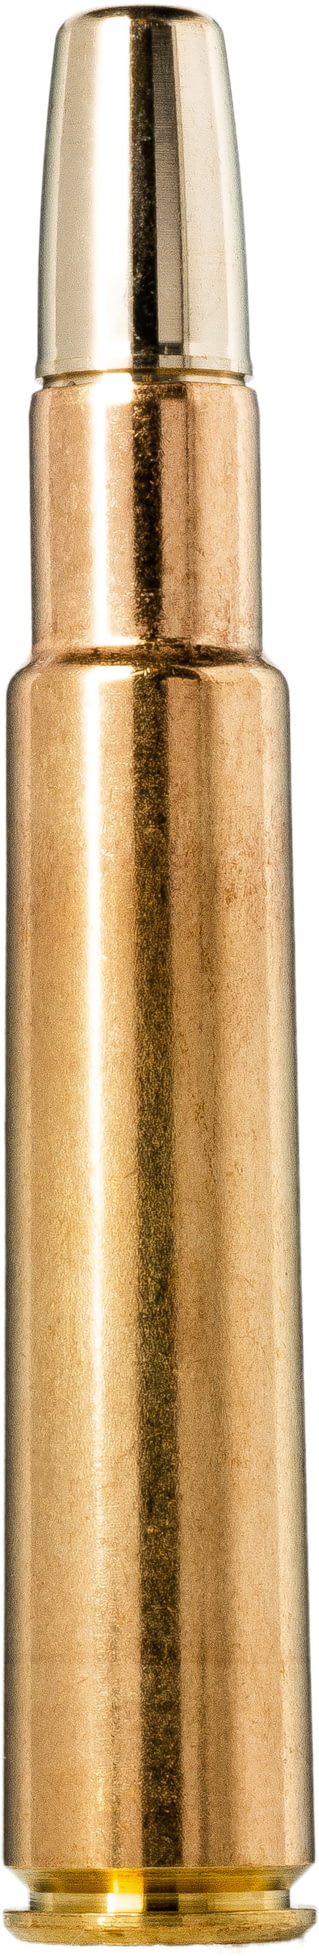 Norma Solid Ammunition .416 Taylor 375 Grain Solid Brass Cased Centerfire Rifle Ammunition